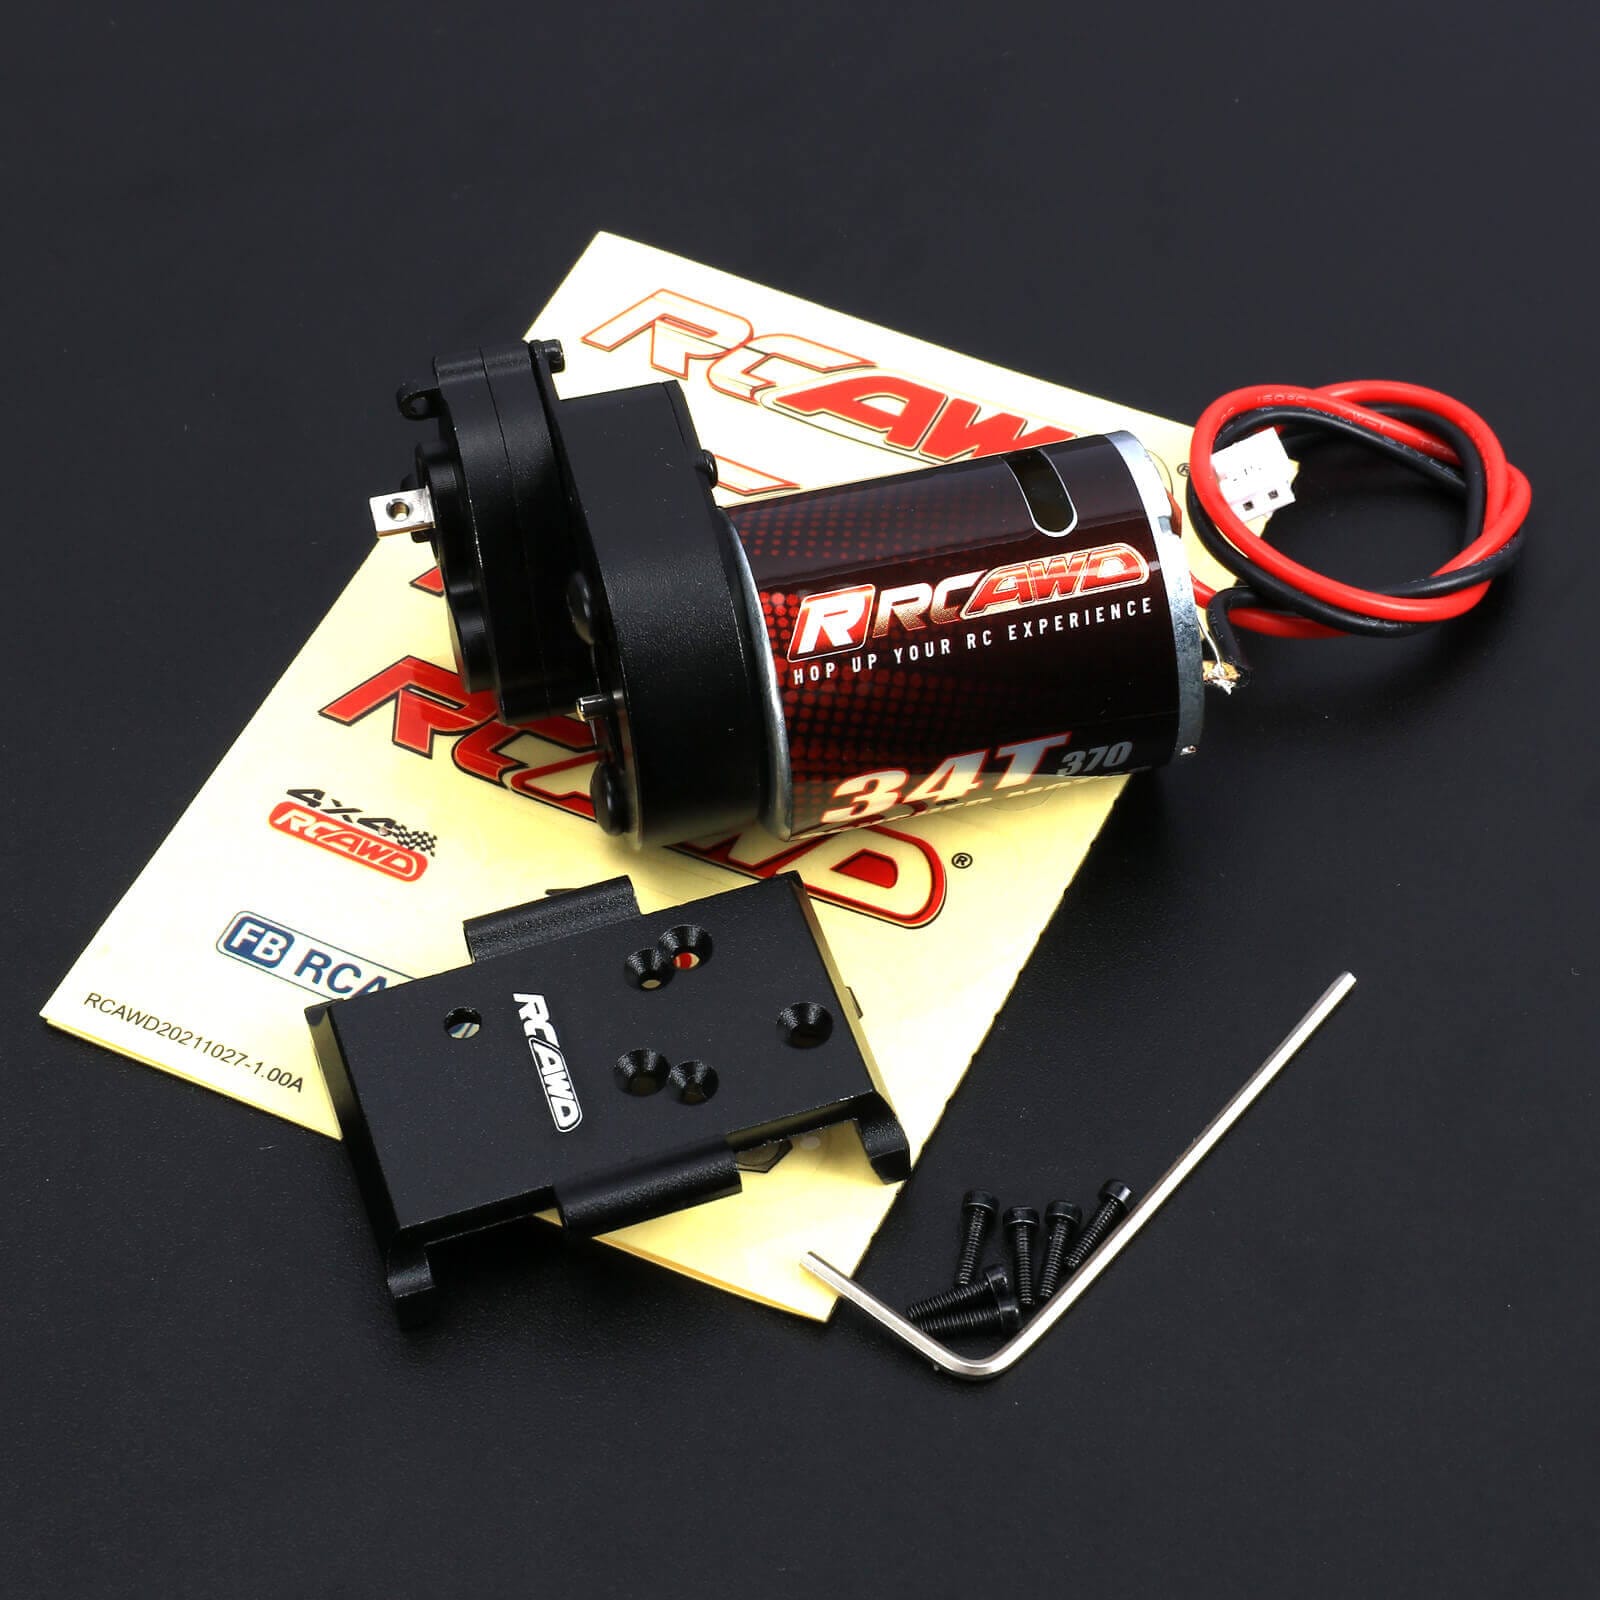 RCAWD HobbyPlus CR18 RCAWD HobbyPlus CR18 Upgrades 370 Motor 34T Metal Gearbox Combo Transmission Full Set 240300